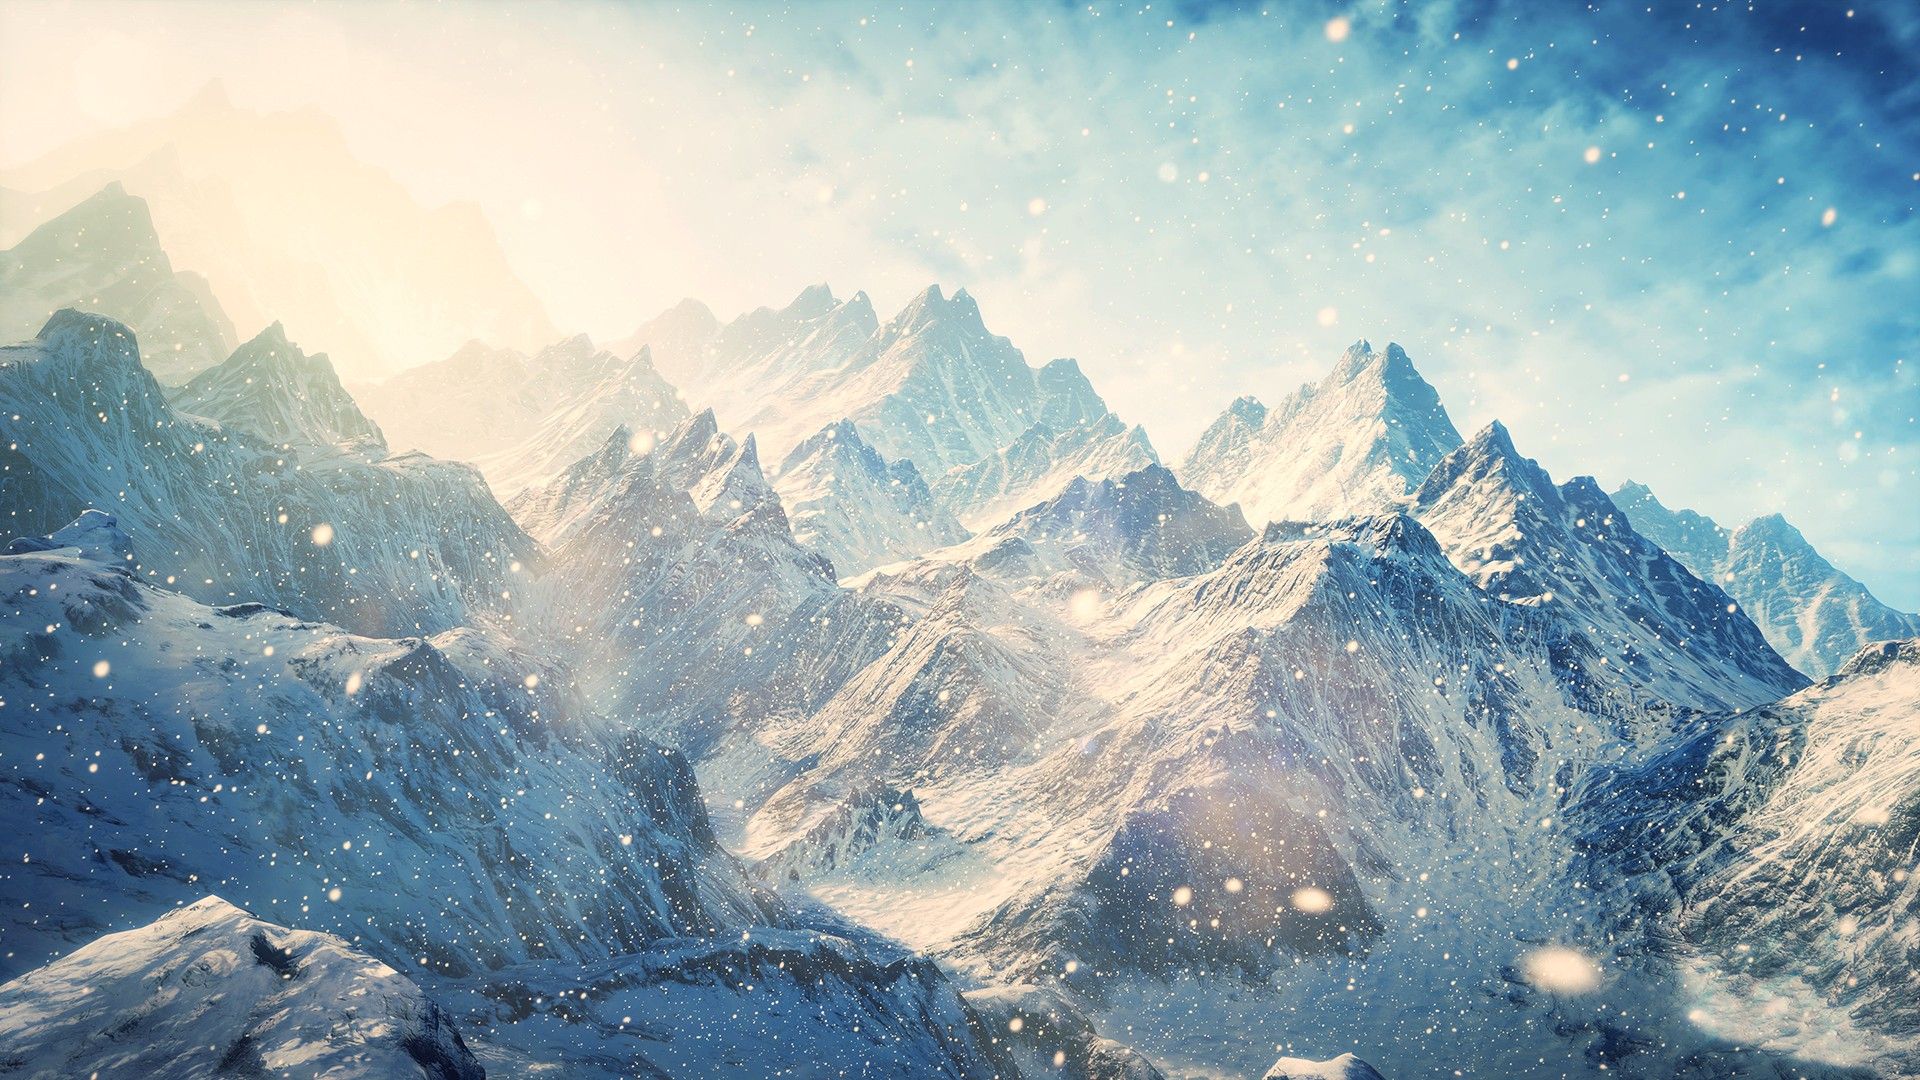 Winter Mountains With Snow HD Wallpaper FullHDWpp   Full HD 1920x1080